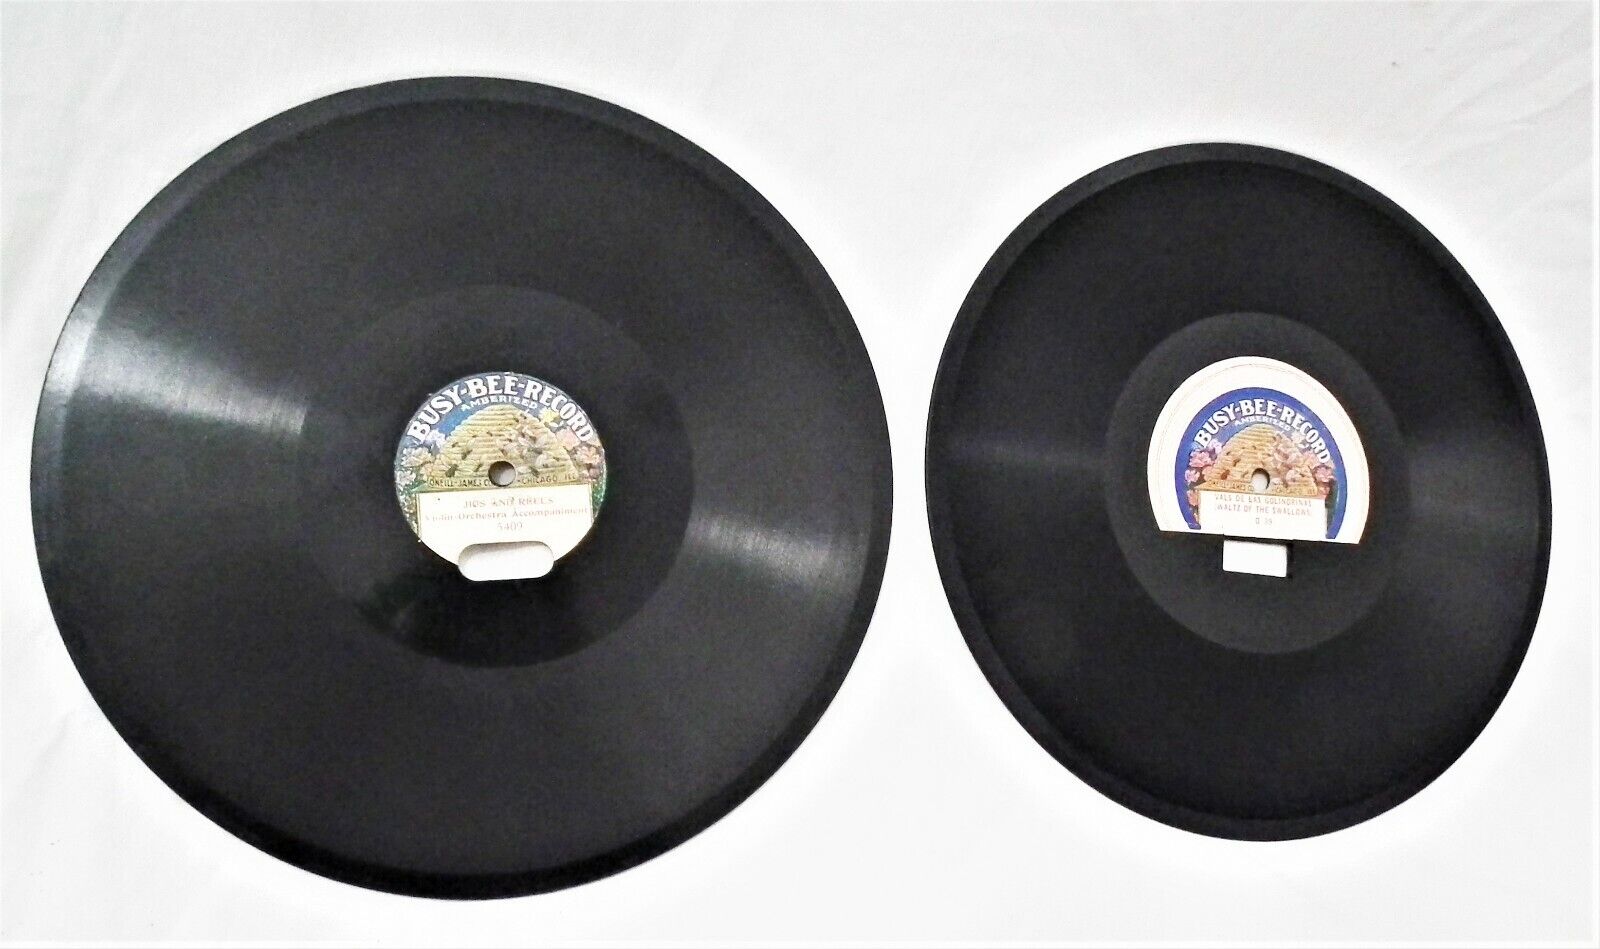 2 RARE VINTAGE EARLY 10"  BUSY BEE PHONOGRAPH GRAMOPHONE VICTROLA 78 RPM RECORD BUSY BEE